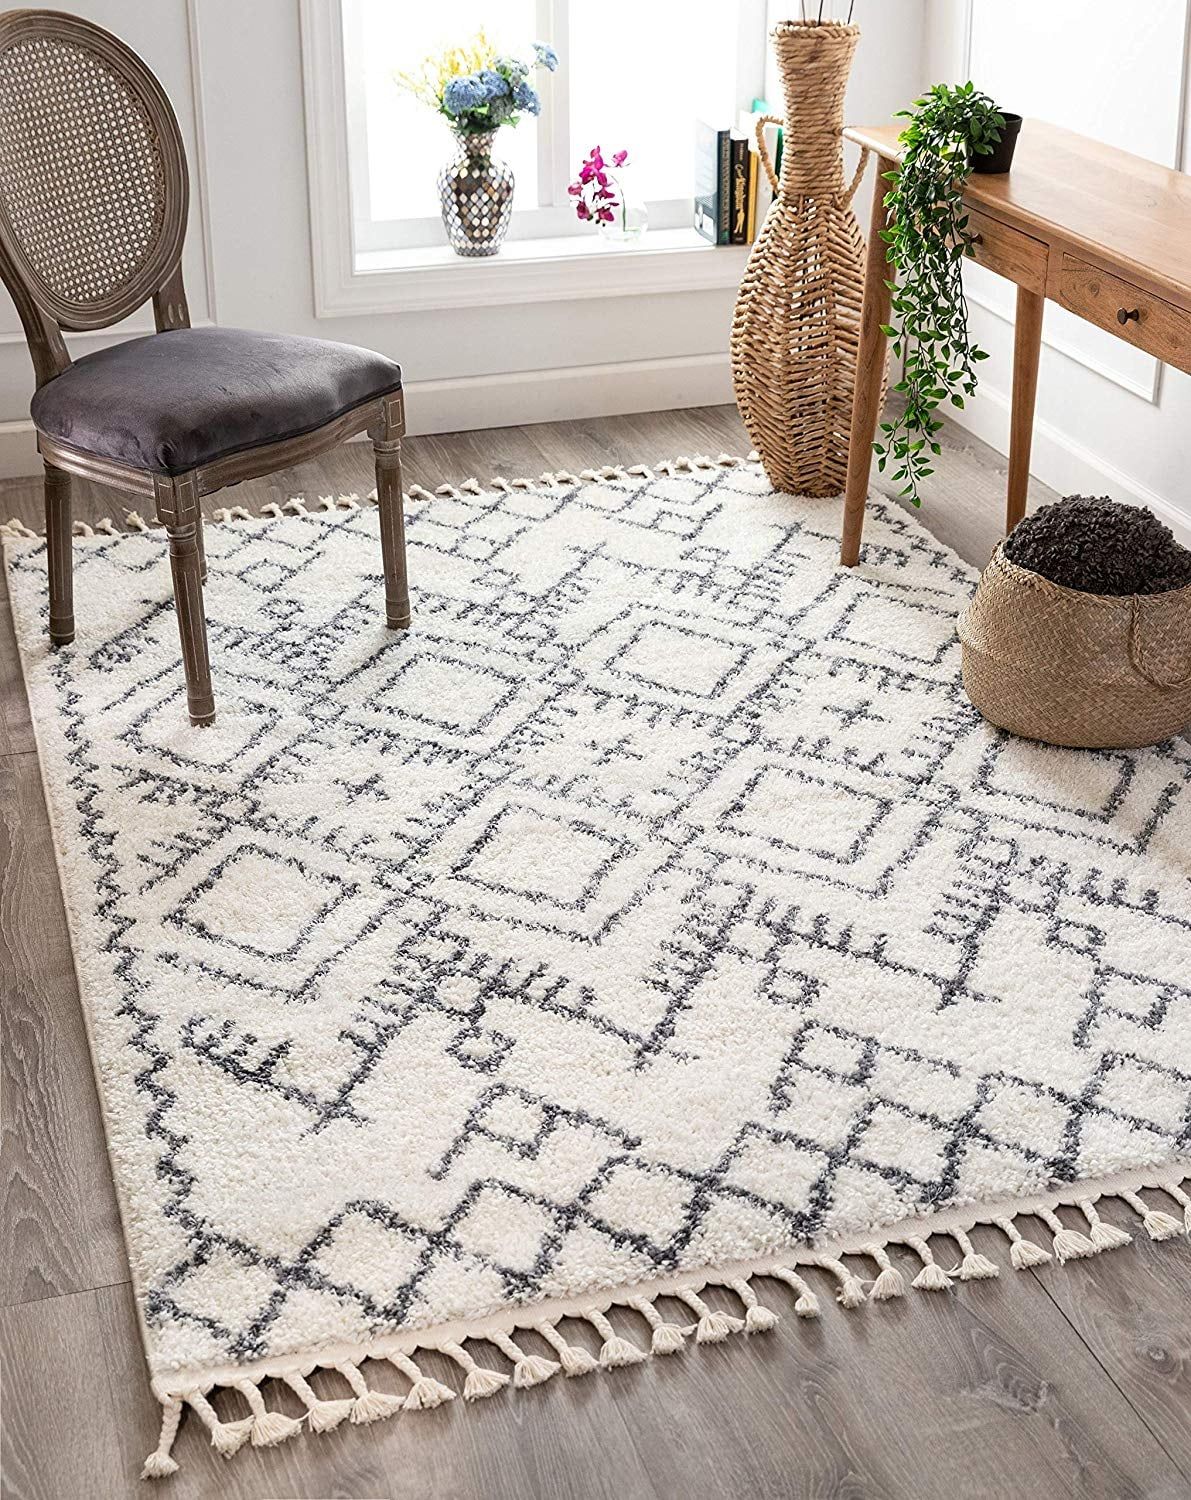 Well Woven Chessa Grey Moroccan Shag Rug | Amazon's 26 Swankiest Gifts For  Your Favorite Homebody | Popsugar Home Photo 16 Throughout Moroccan Shag Rugs (Photo 8 of 15)